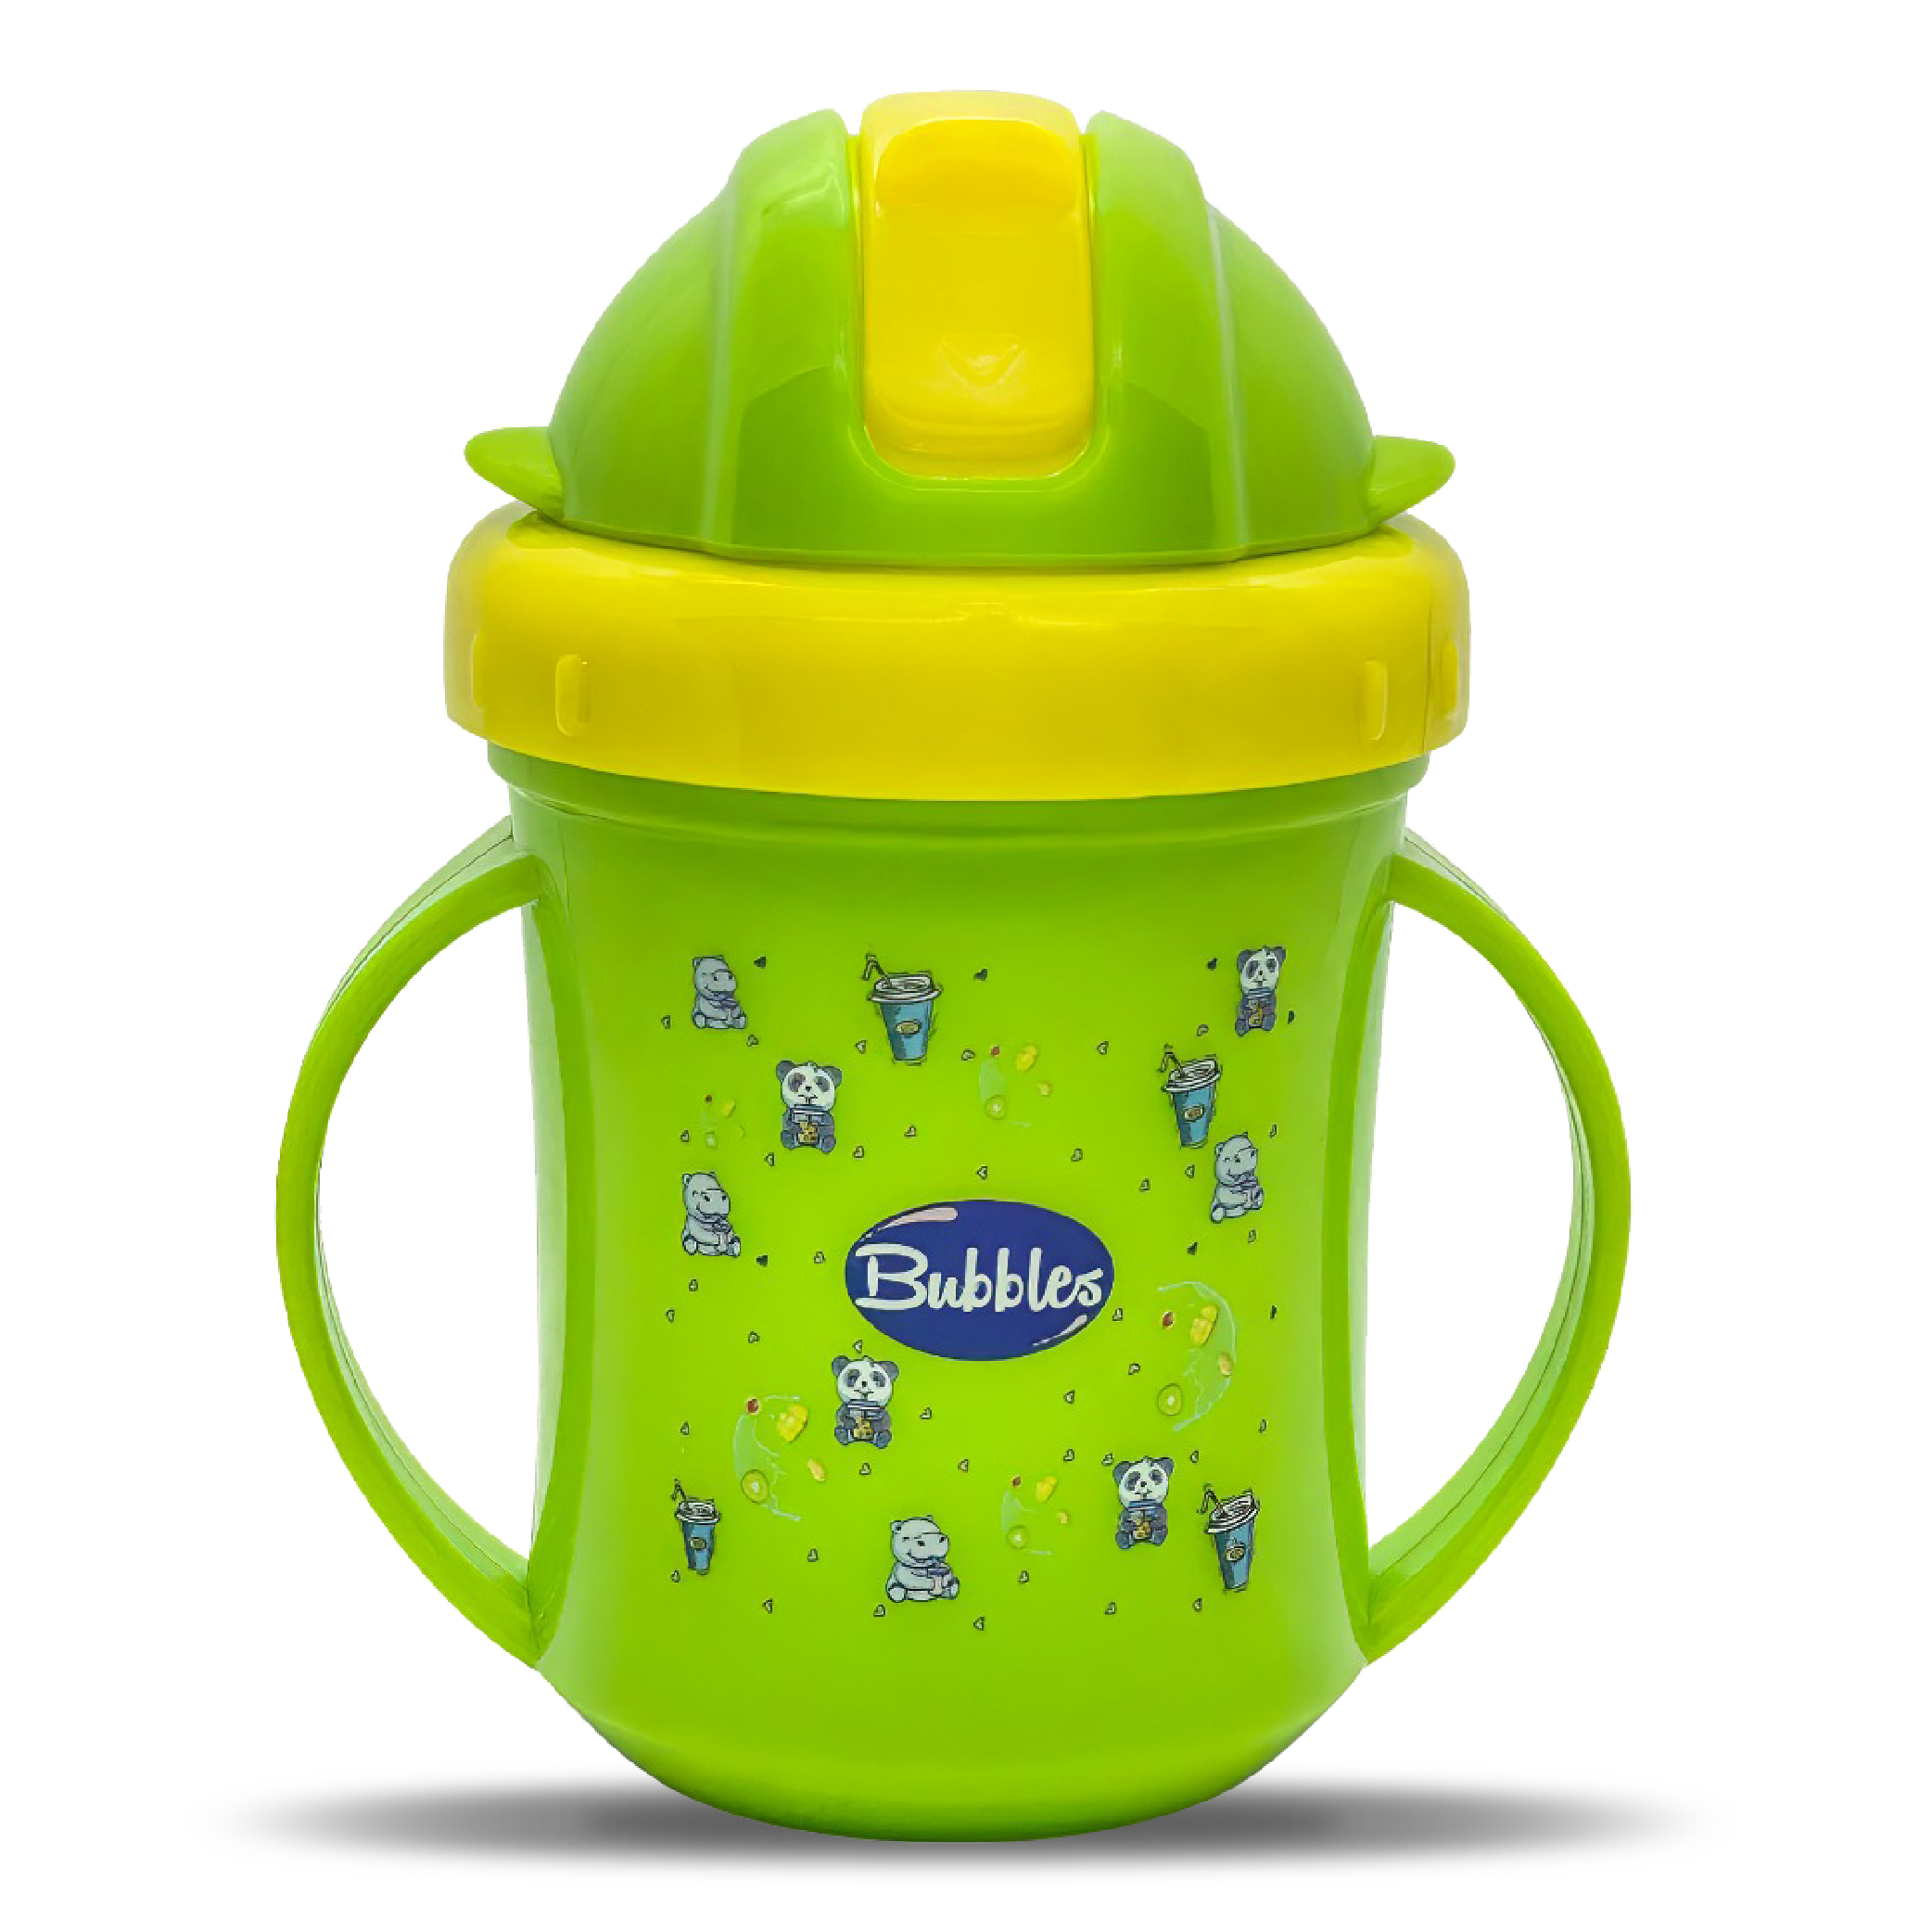 Bubbles Cup With straw For Babies 6 months - Green